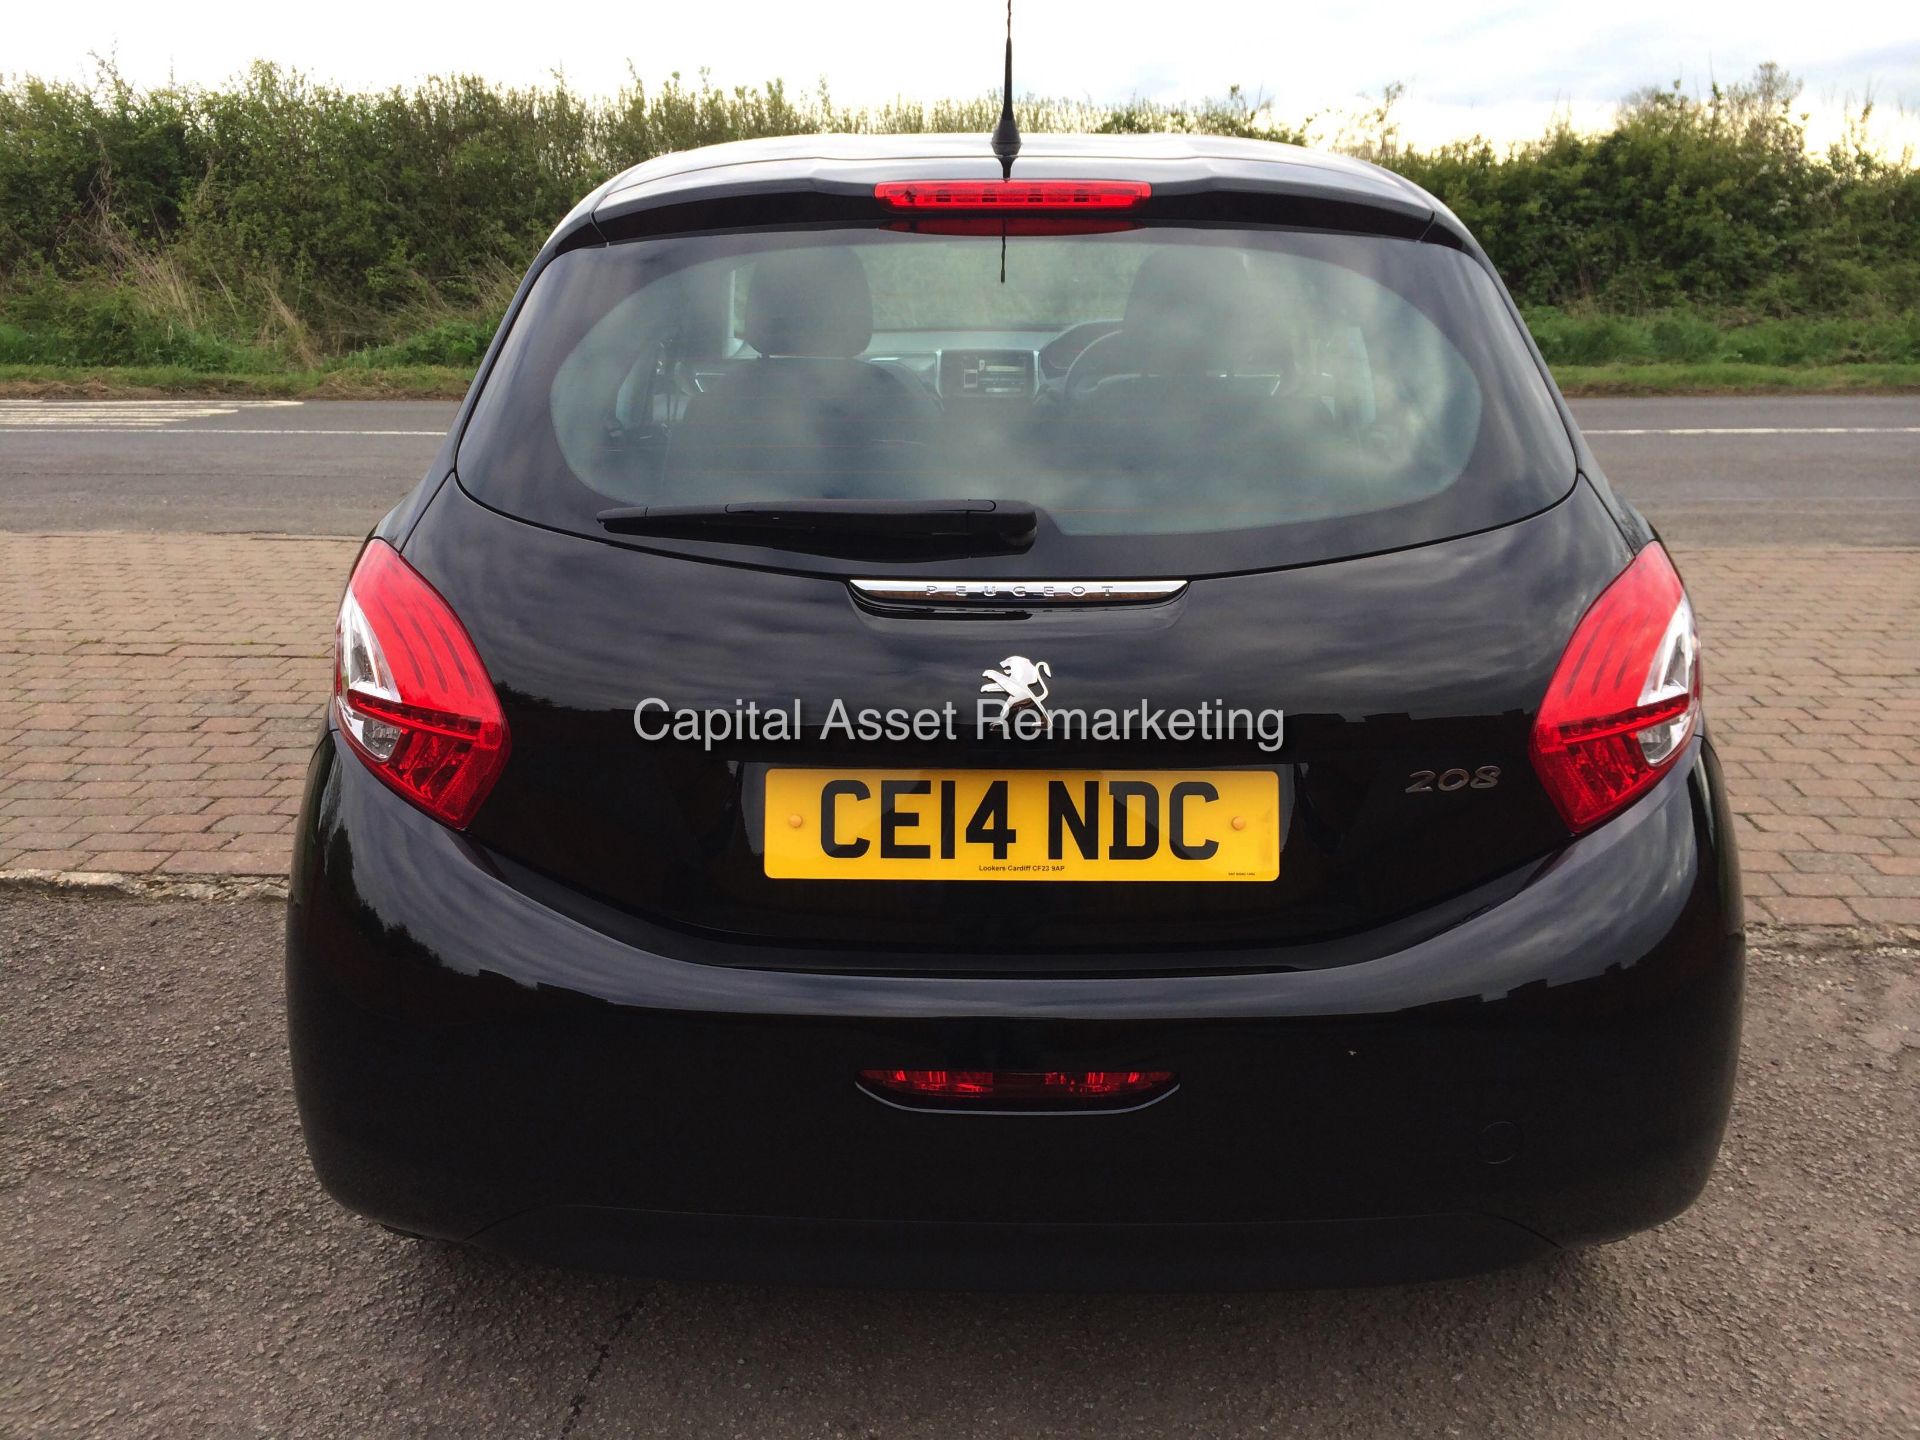 PEUGEOT 208 1.4 HDI 'ACTIVE' 5 DOOR (2014 - 14 REG)  **OWNED BY PEUGEOT FROM NEW** - Image 4 of 15